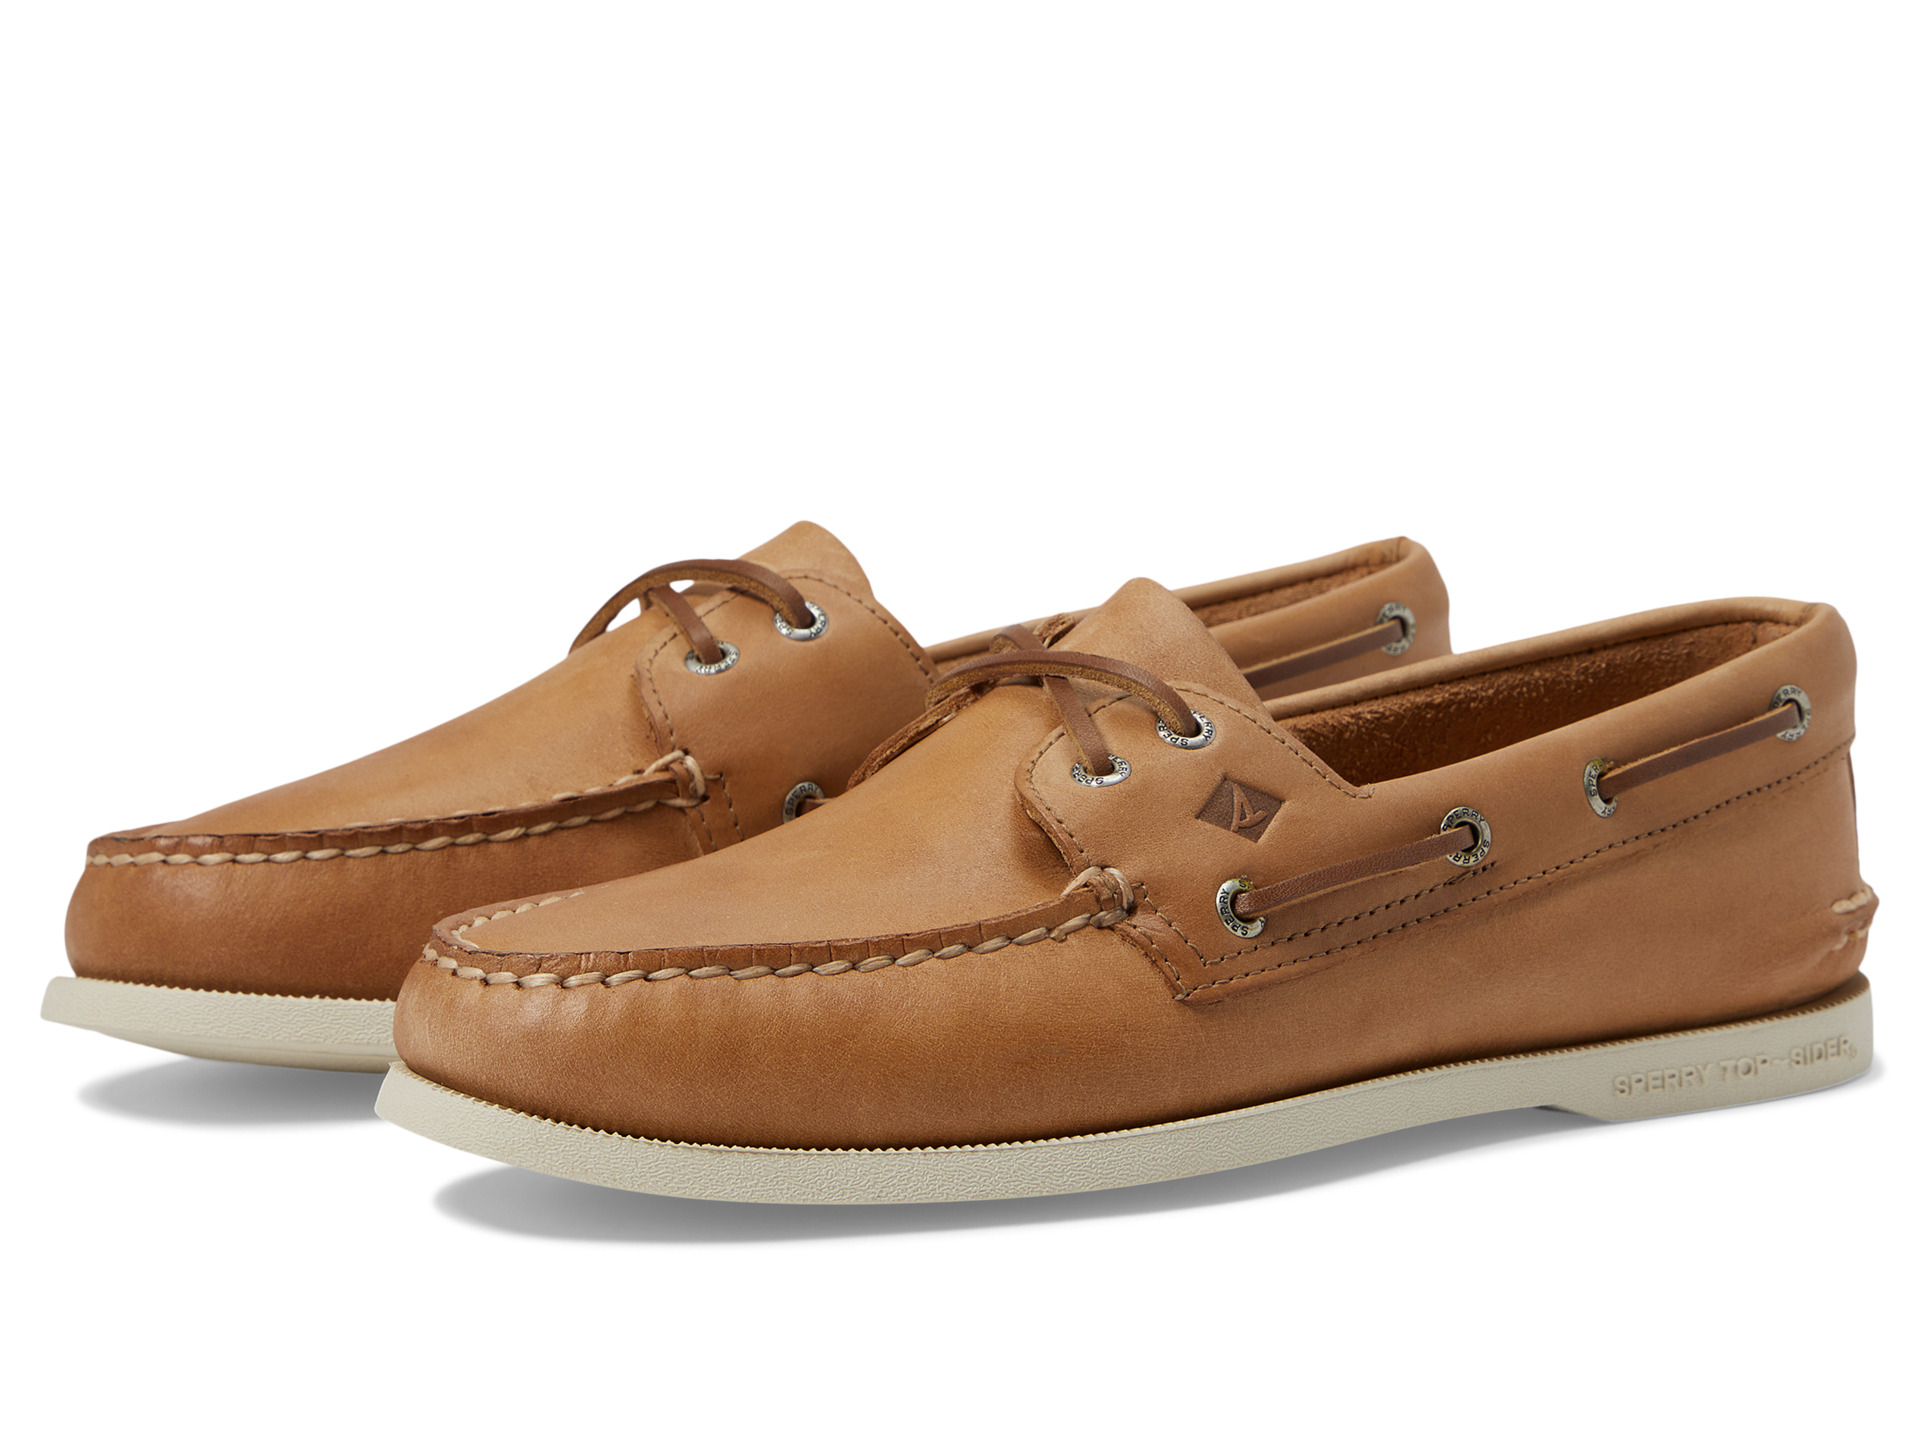 Sperry Top Sider Authentic Original $79.95  Sperry Top 